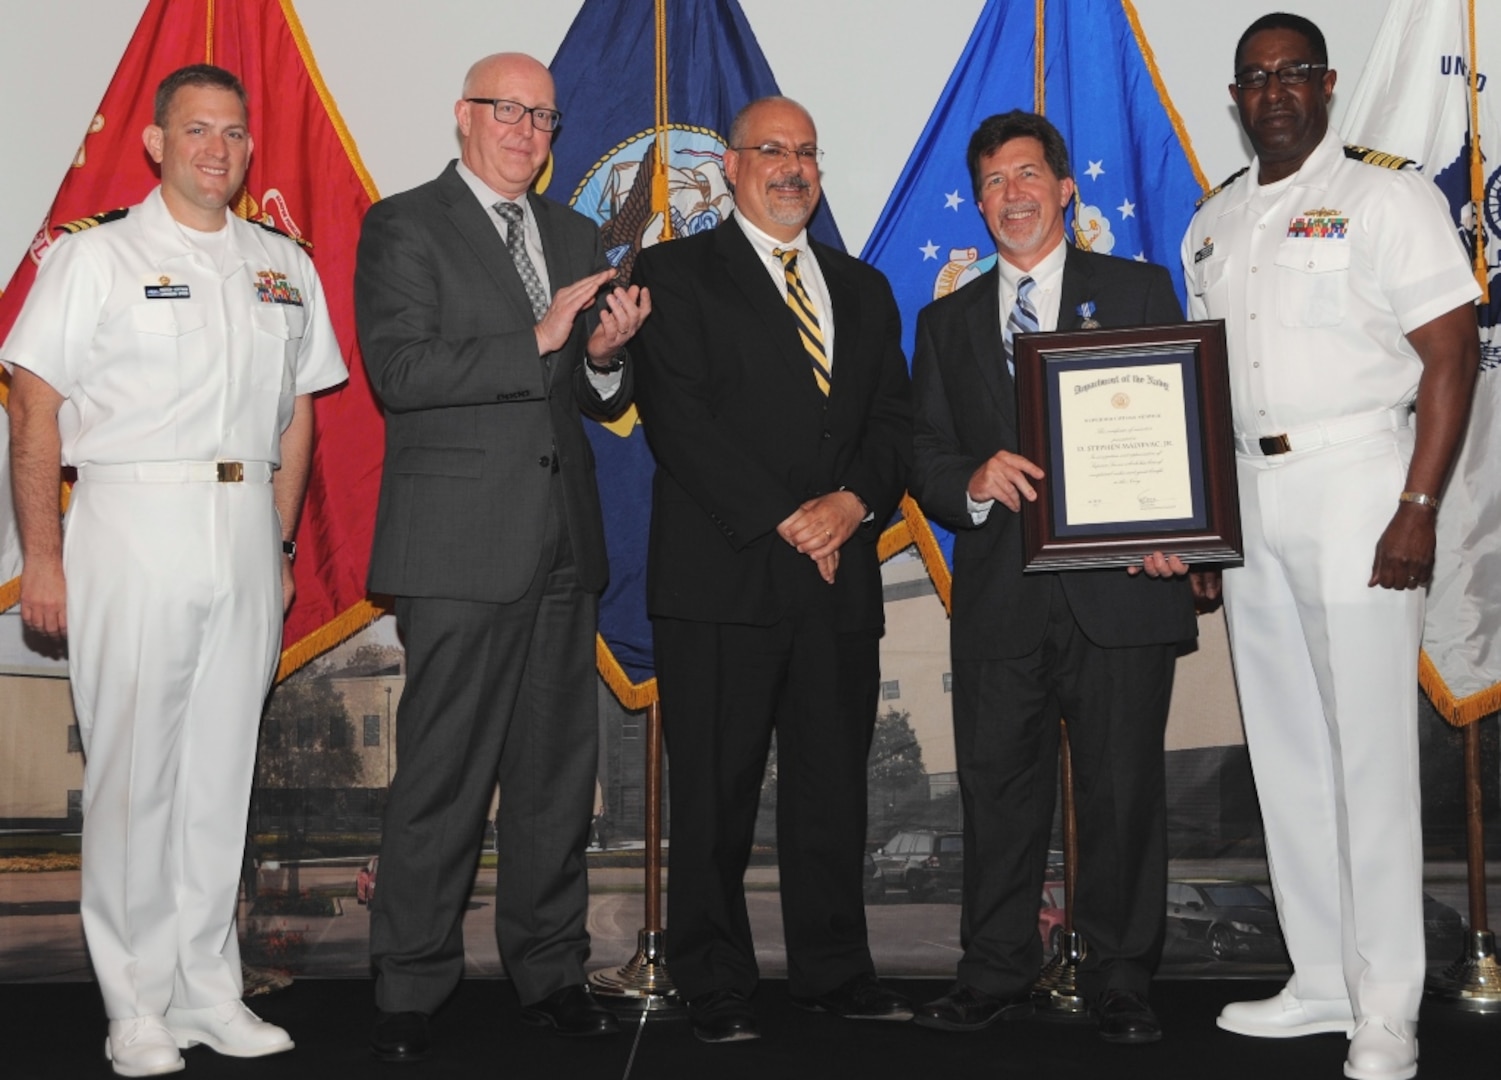 DAHLGREN, Va. (May 17, 2017) - Stephen Malyevac holds a framed certificate moments after receiving the Navy Superior Civilian Service Award at the Naval Surface Warfare Center Dahlgren Division (NSWCDD) Annual Honor Awards ceremony. Malyevac was recognized for numerous technical and leadership contributions as the NSWCDD Distinguished Engineer for Surface Engagement. "His accomplishments as a nationally recognized expert in guidance and control, missile systems, guided projectiles, and surface weapon systems have played a critical role in establishing Dahlgren Division's reputation as a center of excellence for weapon system engineering and integration," according to the citation. "Mr. Malyevac's leadership on numerous high profile technical efforts has resulted in the successful fielding of many of the technologies and capabilities that form the foundation of our surface fleet today."  Standing left to right: Combat Direction Systems Activity Commanding Officer Cmdr. Andrew Hoffman; Naval Surface Warfare Center and Naval Undersea Warfare Center Executive Director Donald McCormack; NSWCDD Technical Director John Fiore; Malyevac; and NSWCDD Commanding Officer Capt. Godfrey 'Gus' Weekes. 